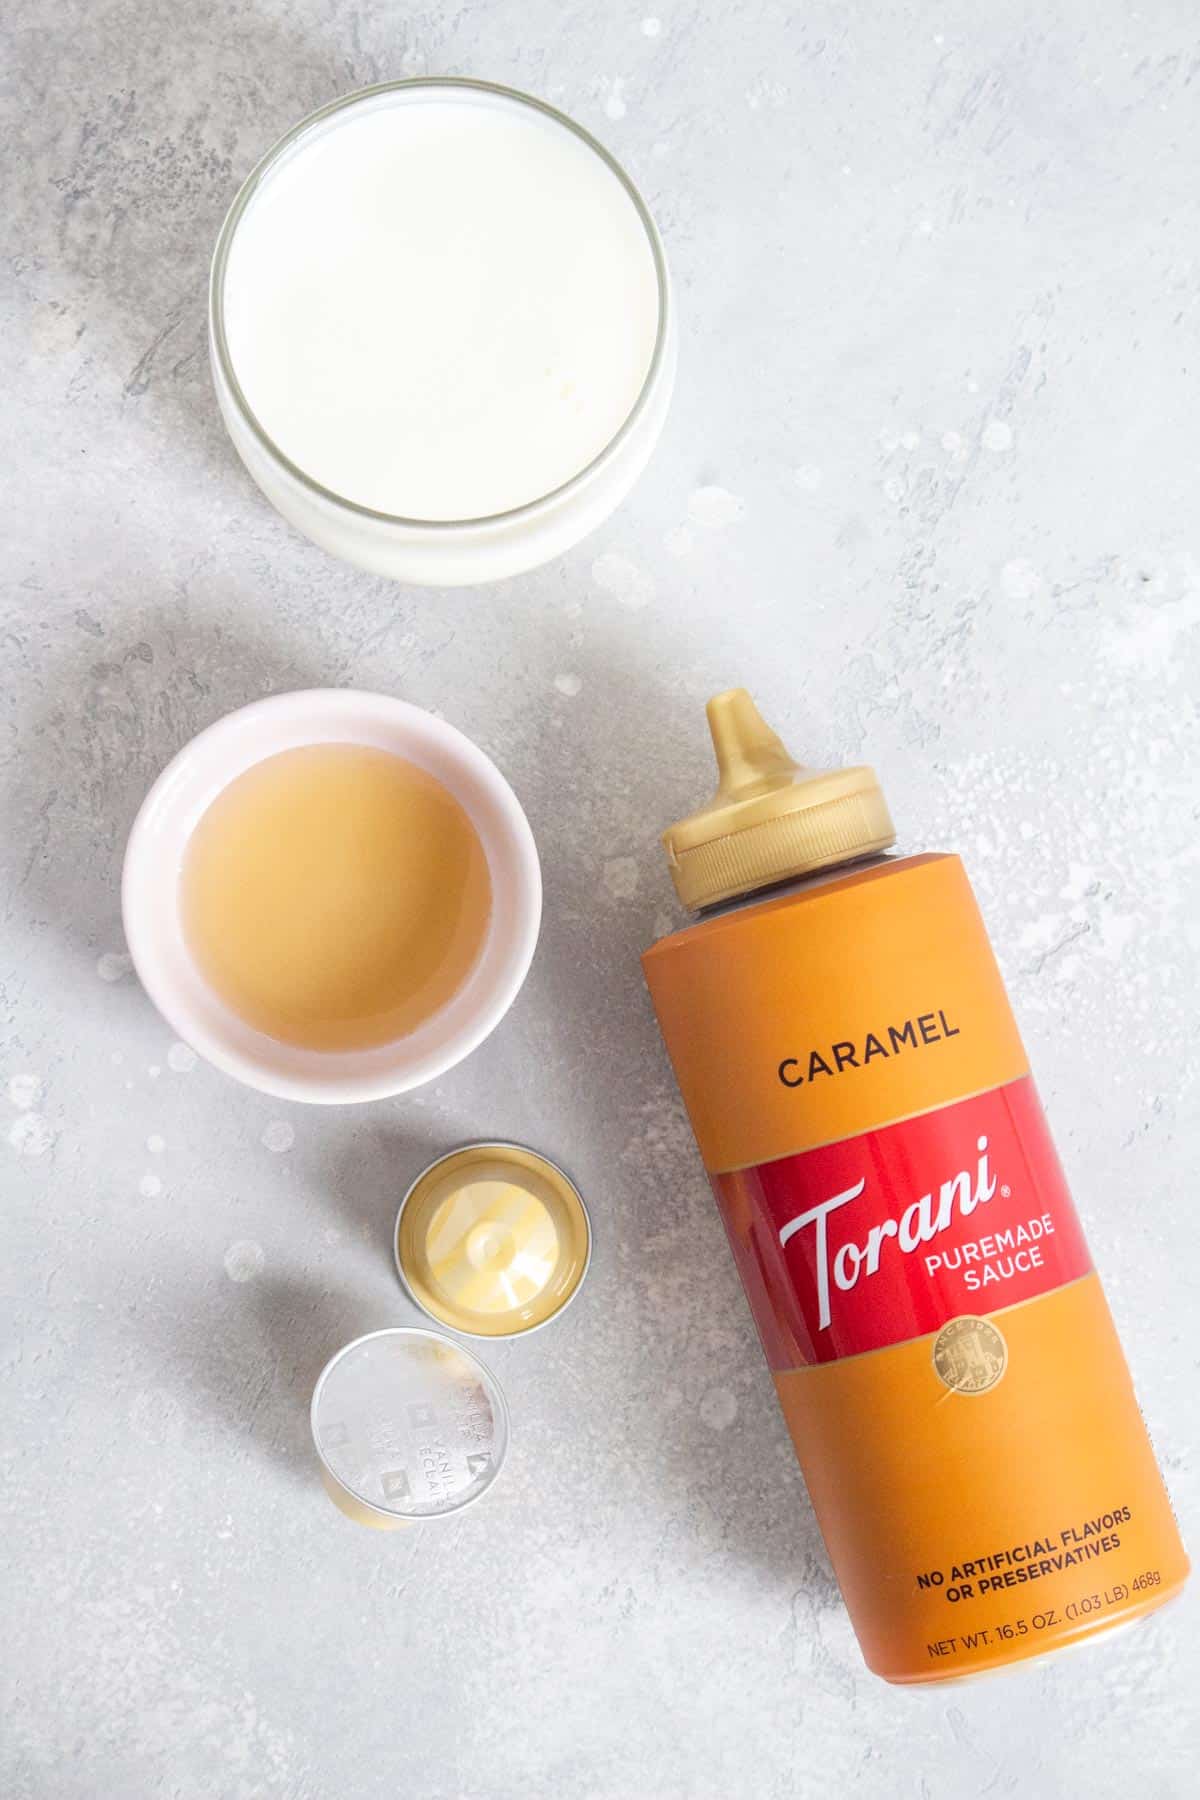 Ingredients on how tomake an iced caramel latte.